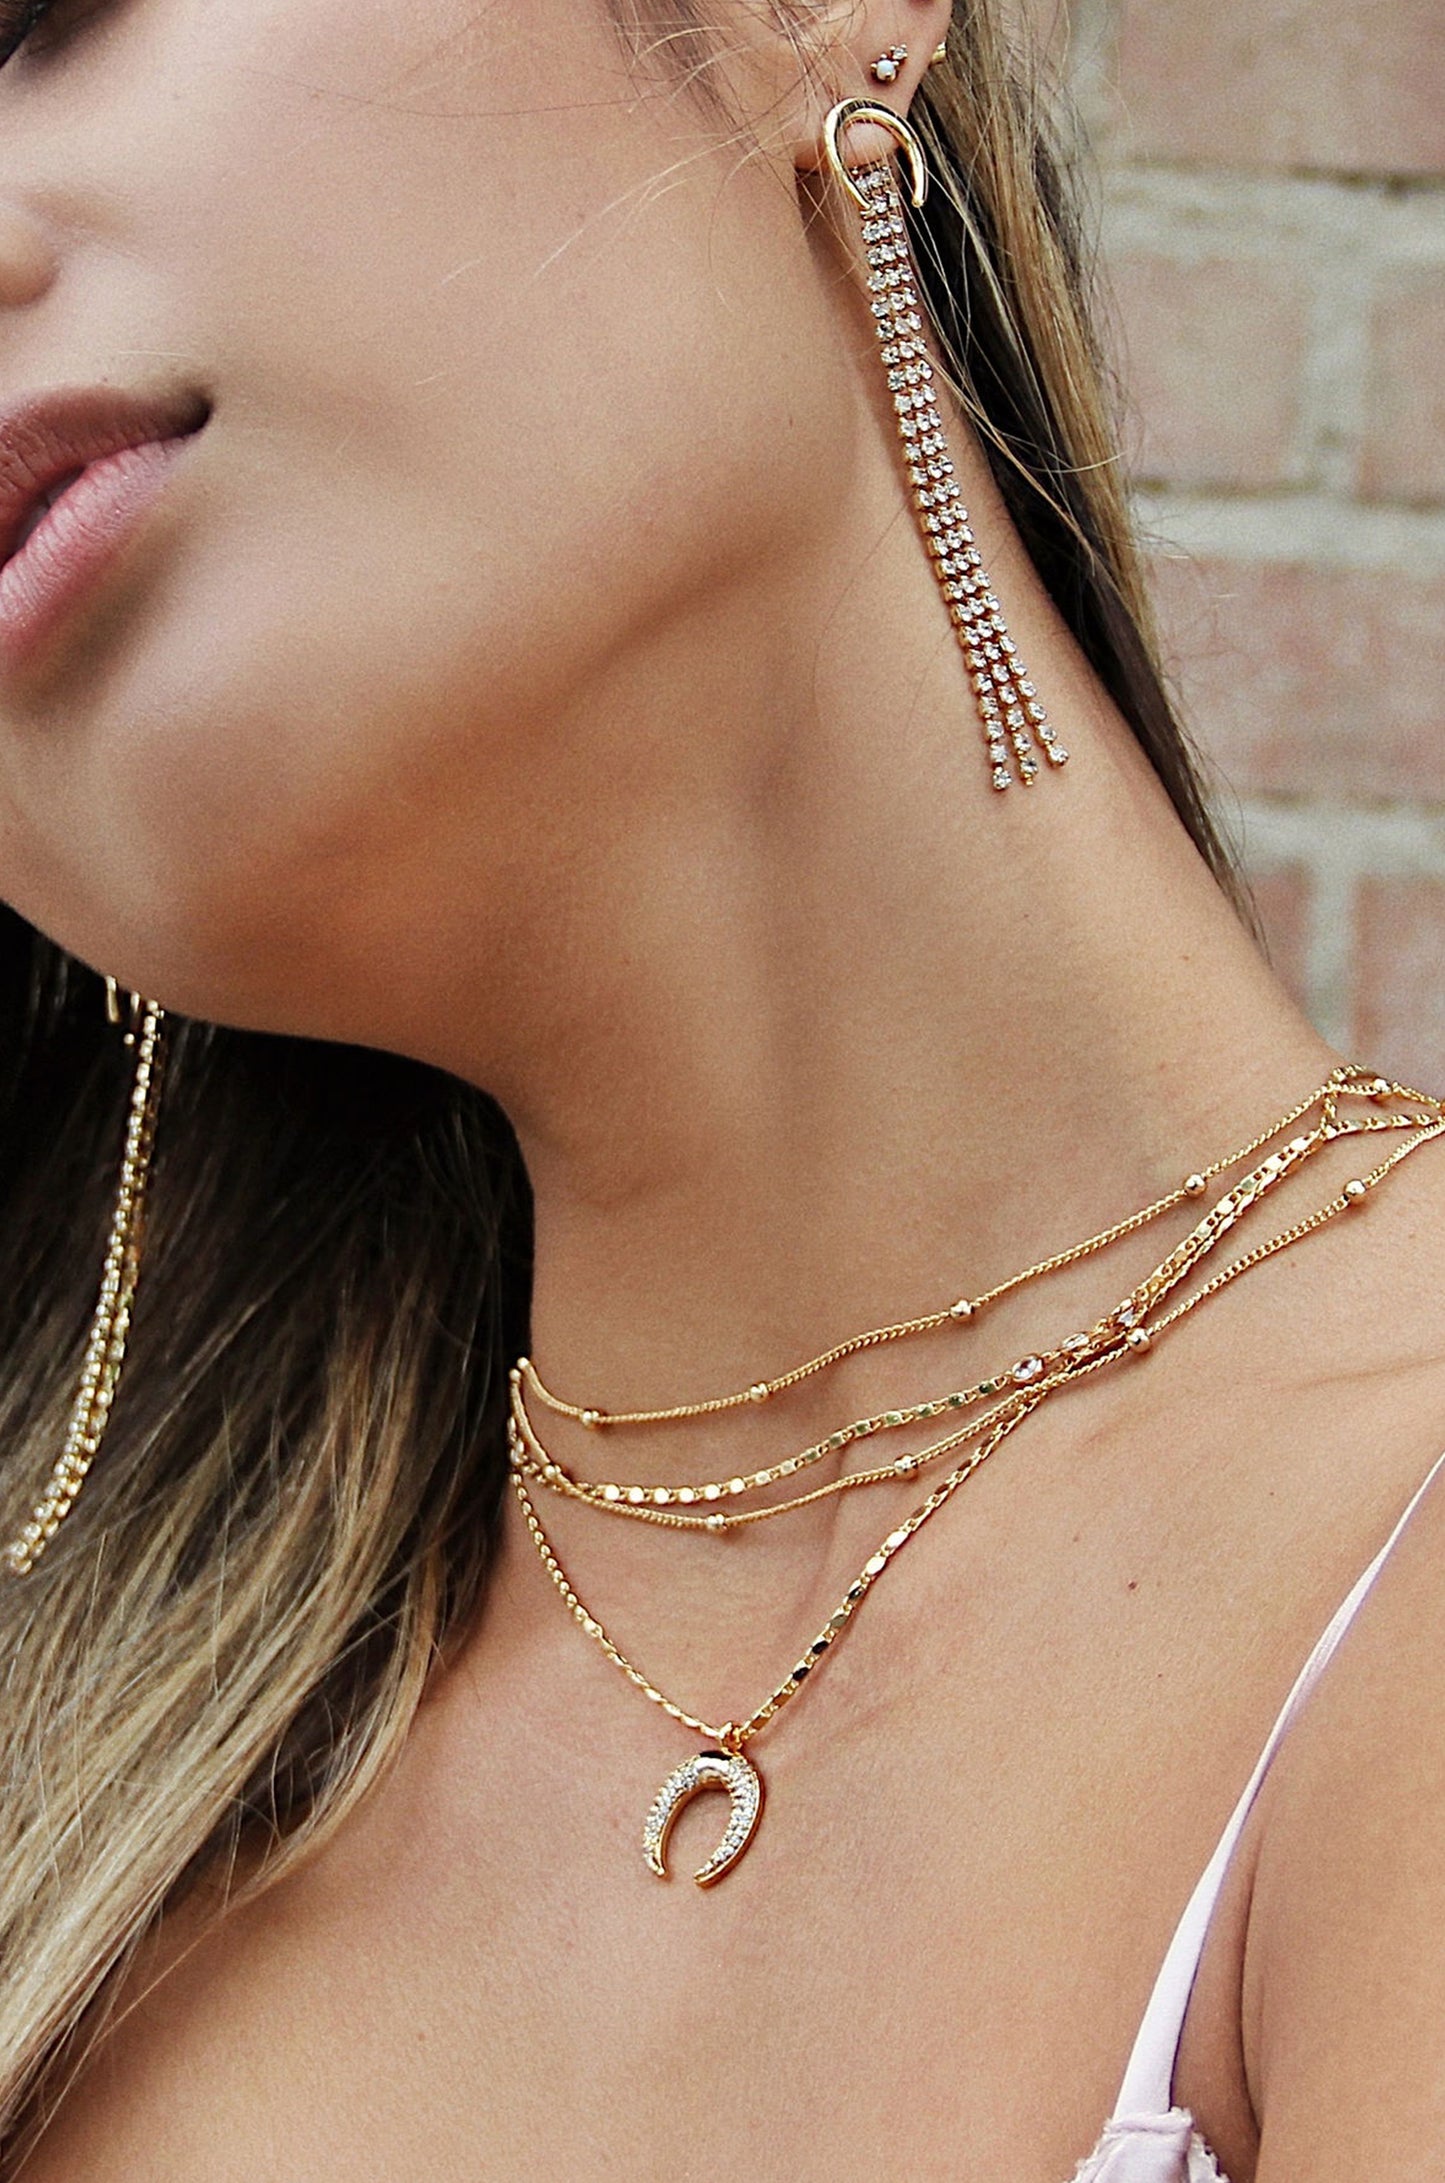 Layered Gold Chain & Crescent Horn Necklace  shown on a model  